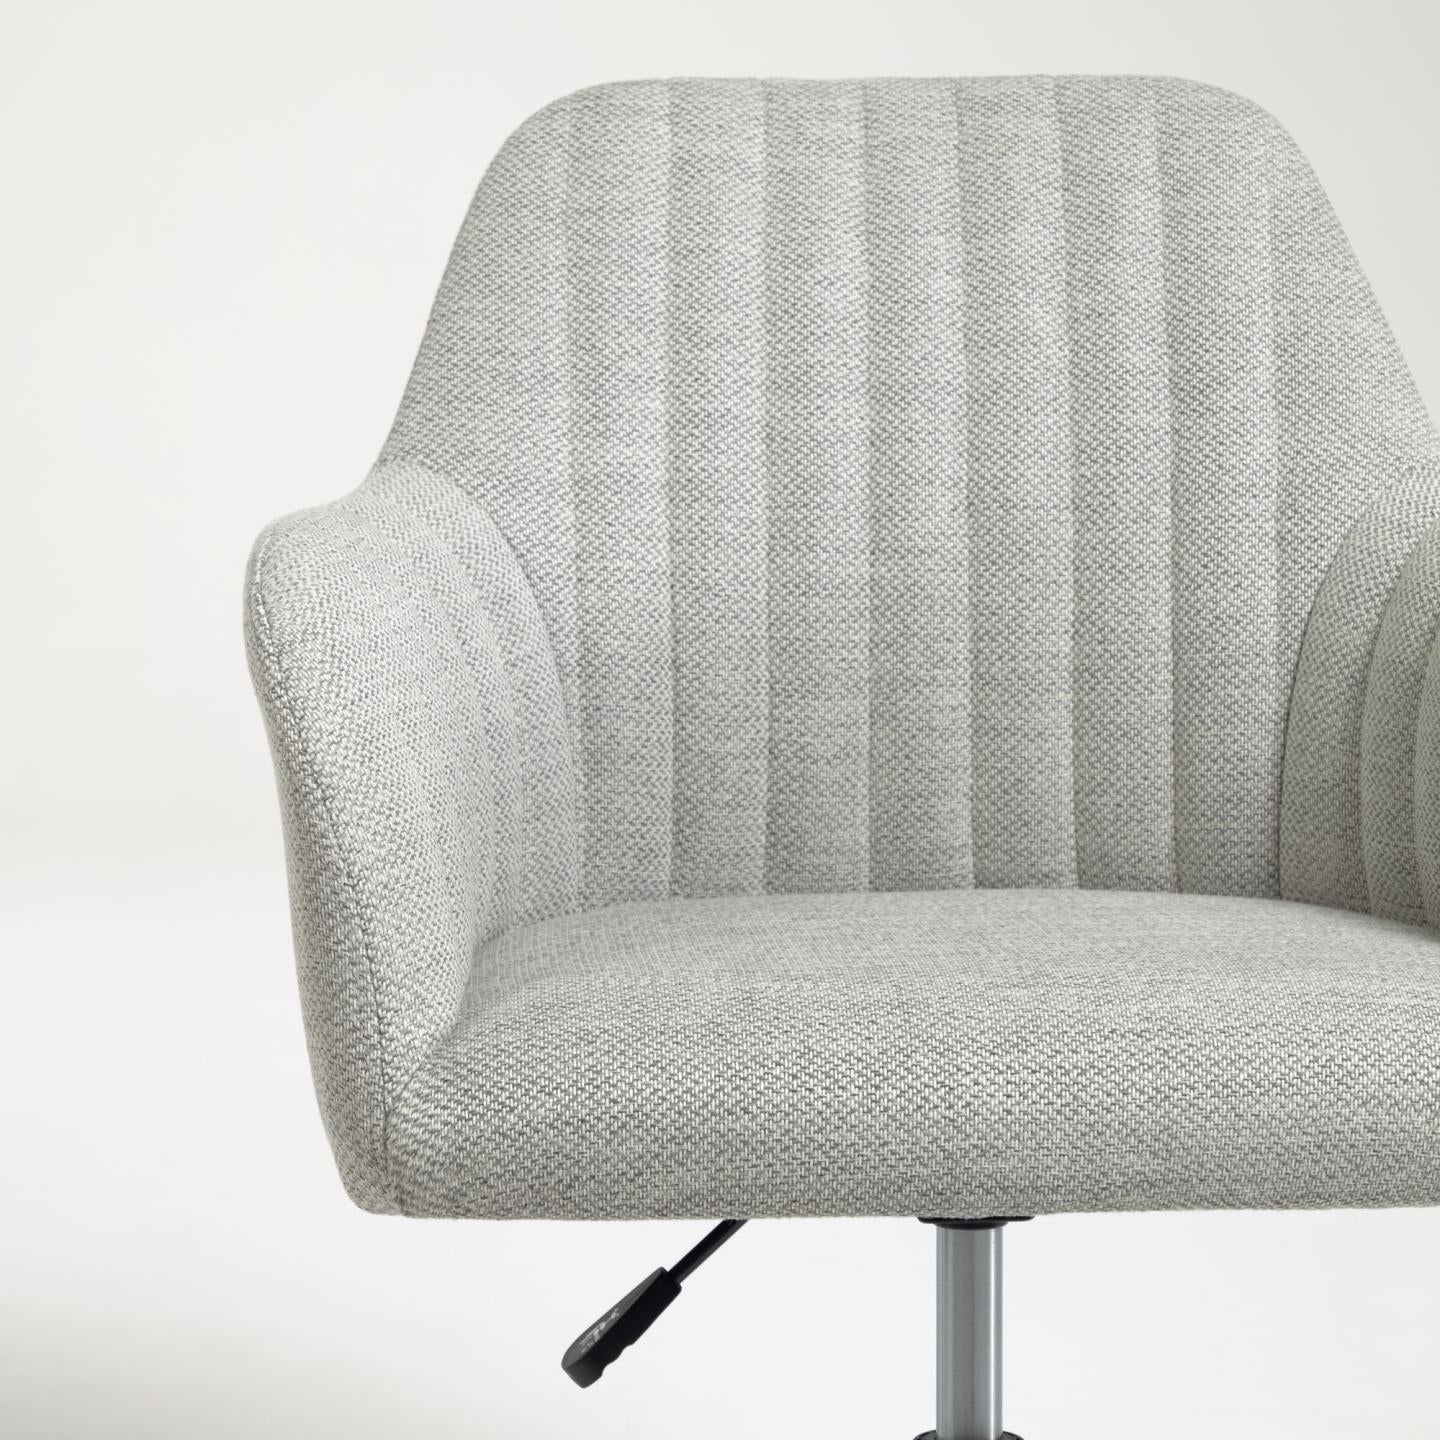 Grey Fabric Office Chair